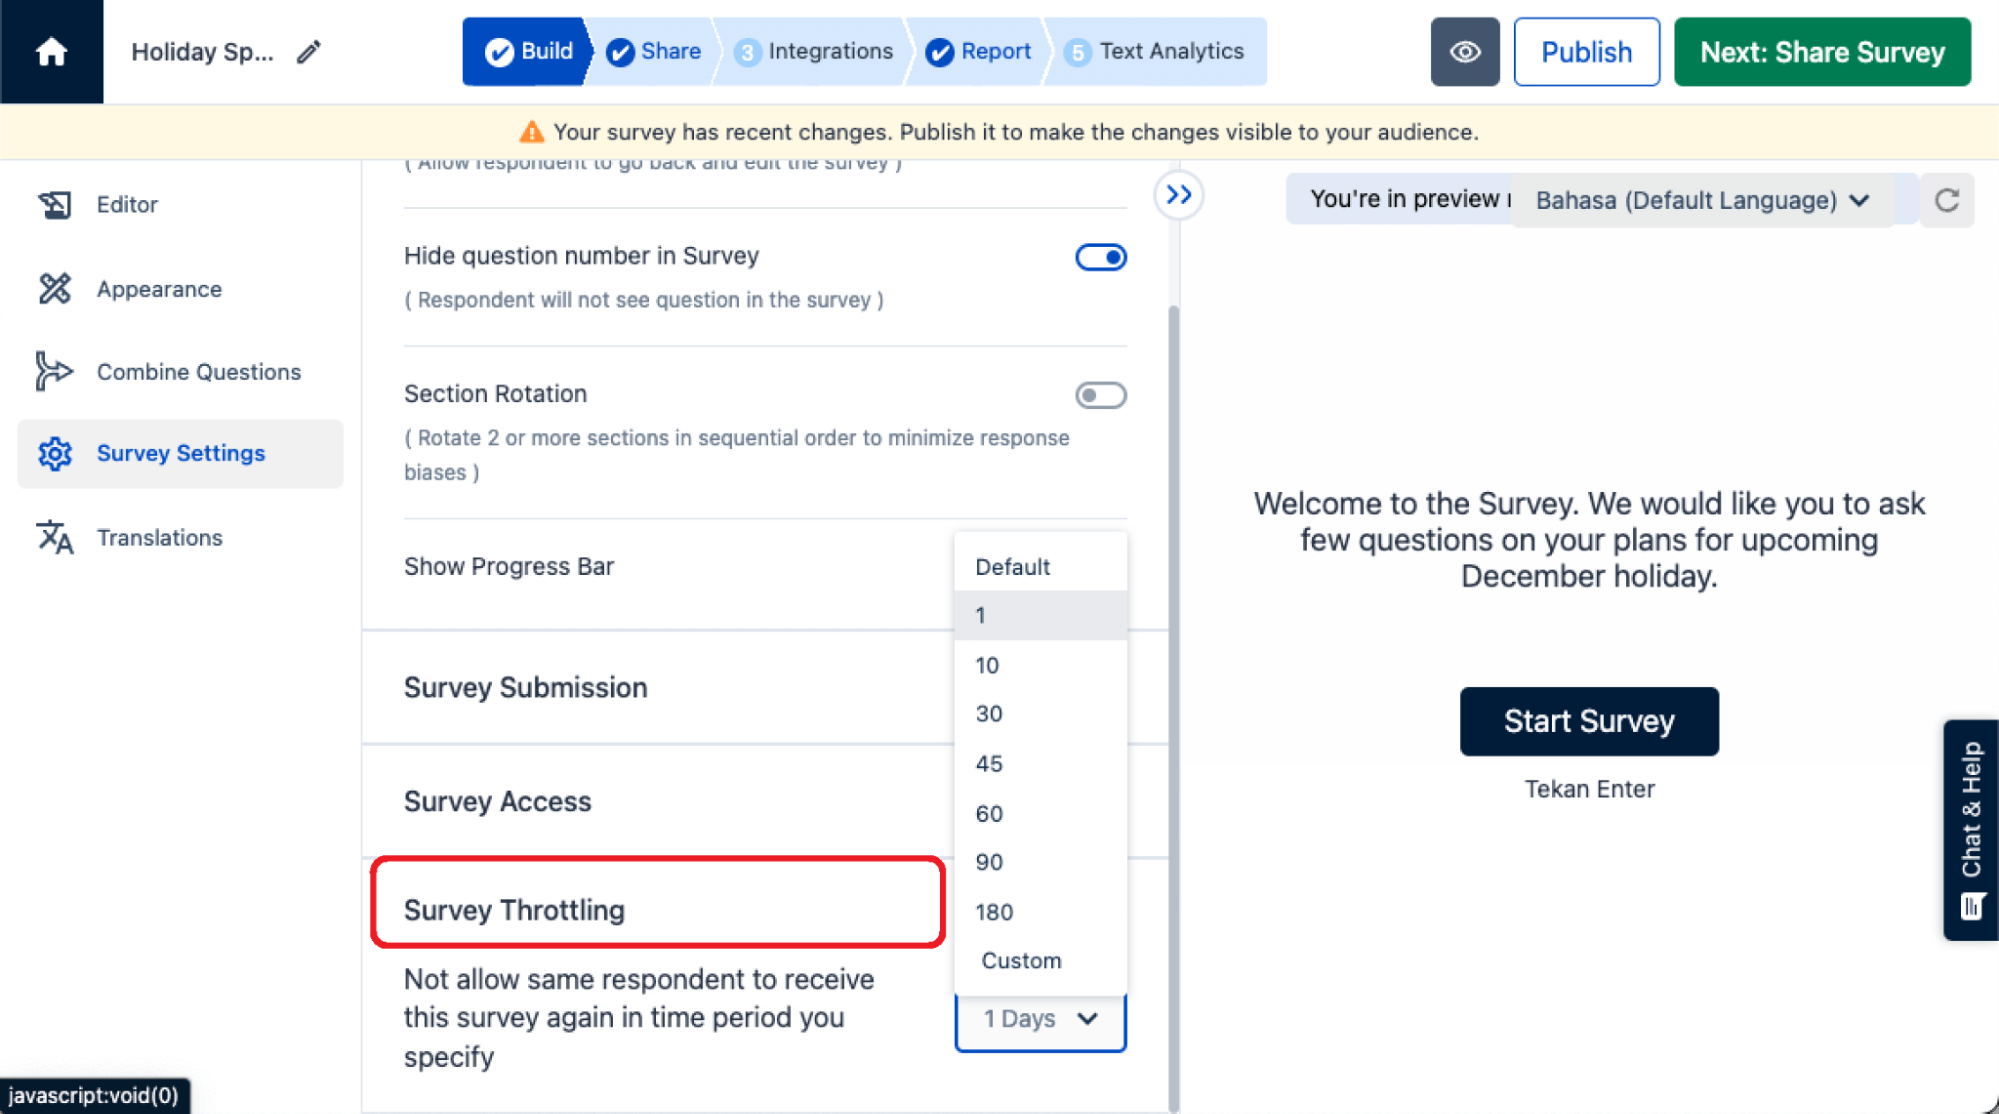 The image shows the Survey Throttling feature of SurveySensum where you can add a defined timeline to your survey frequency which will not allow you to send the survey to your customers within that time frame